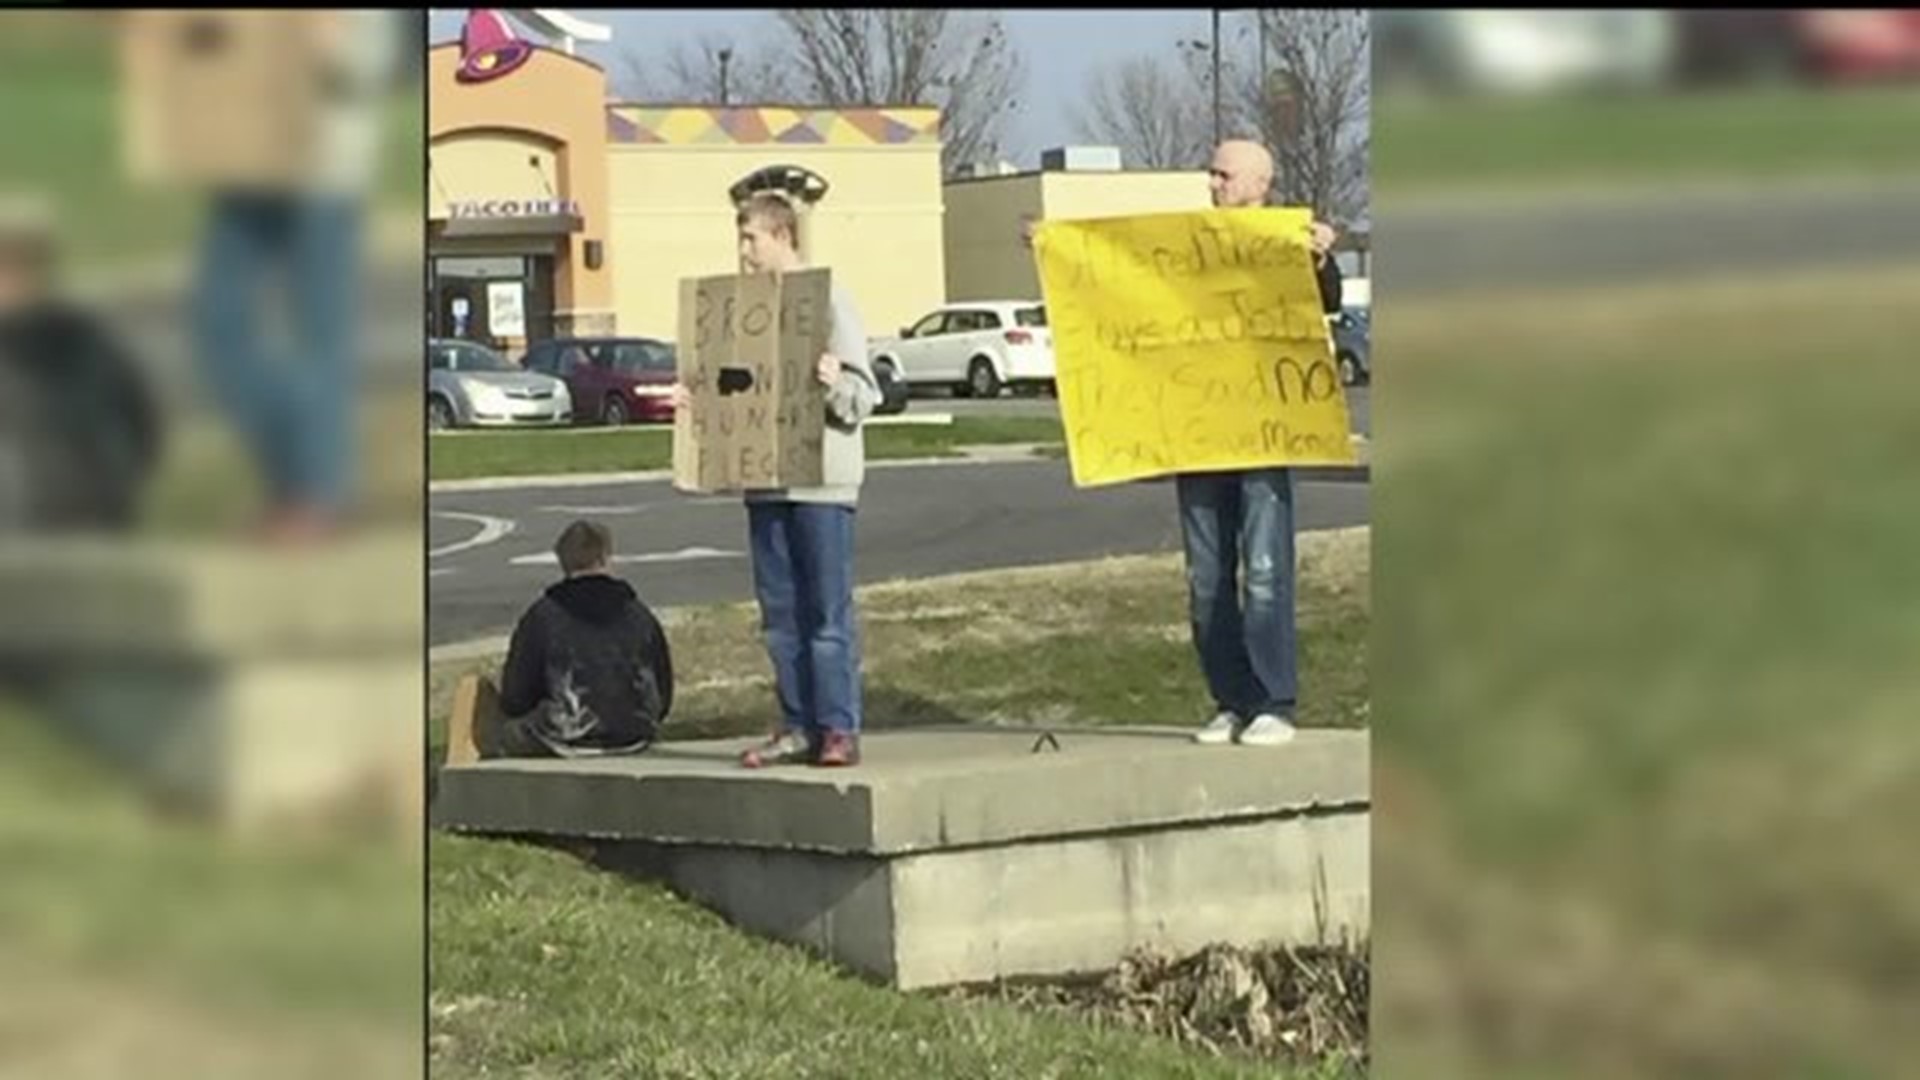 Panhandlers reject job offers